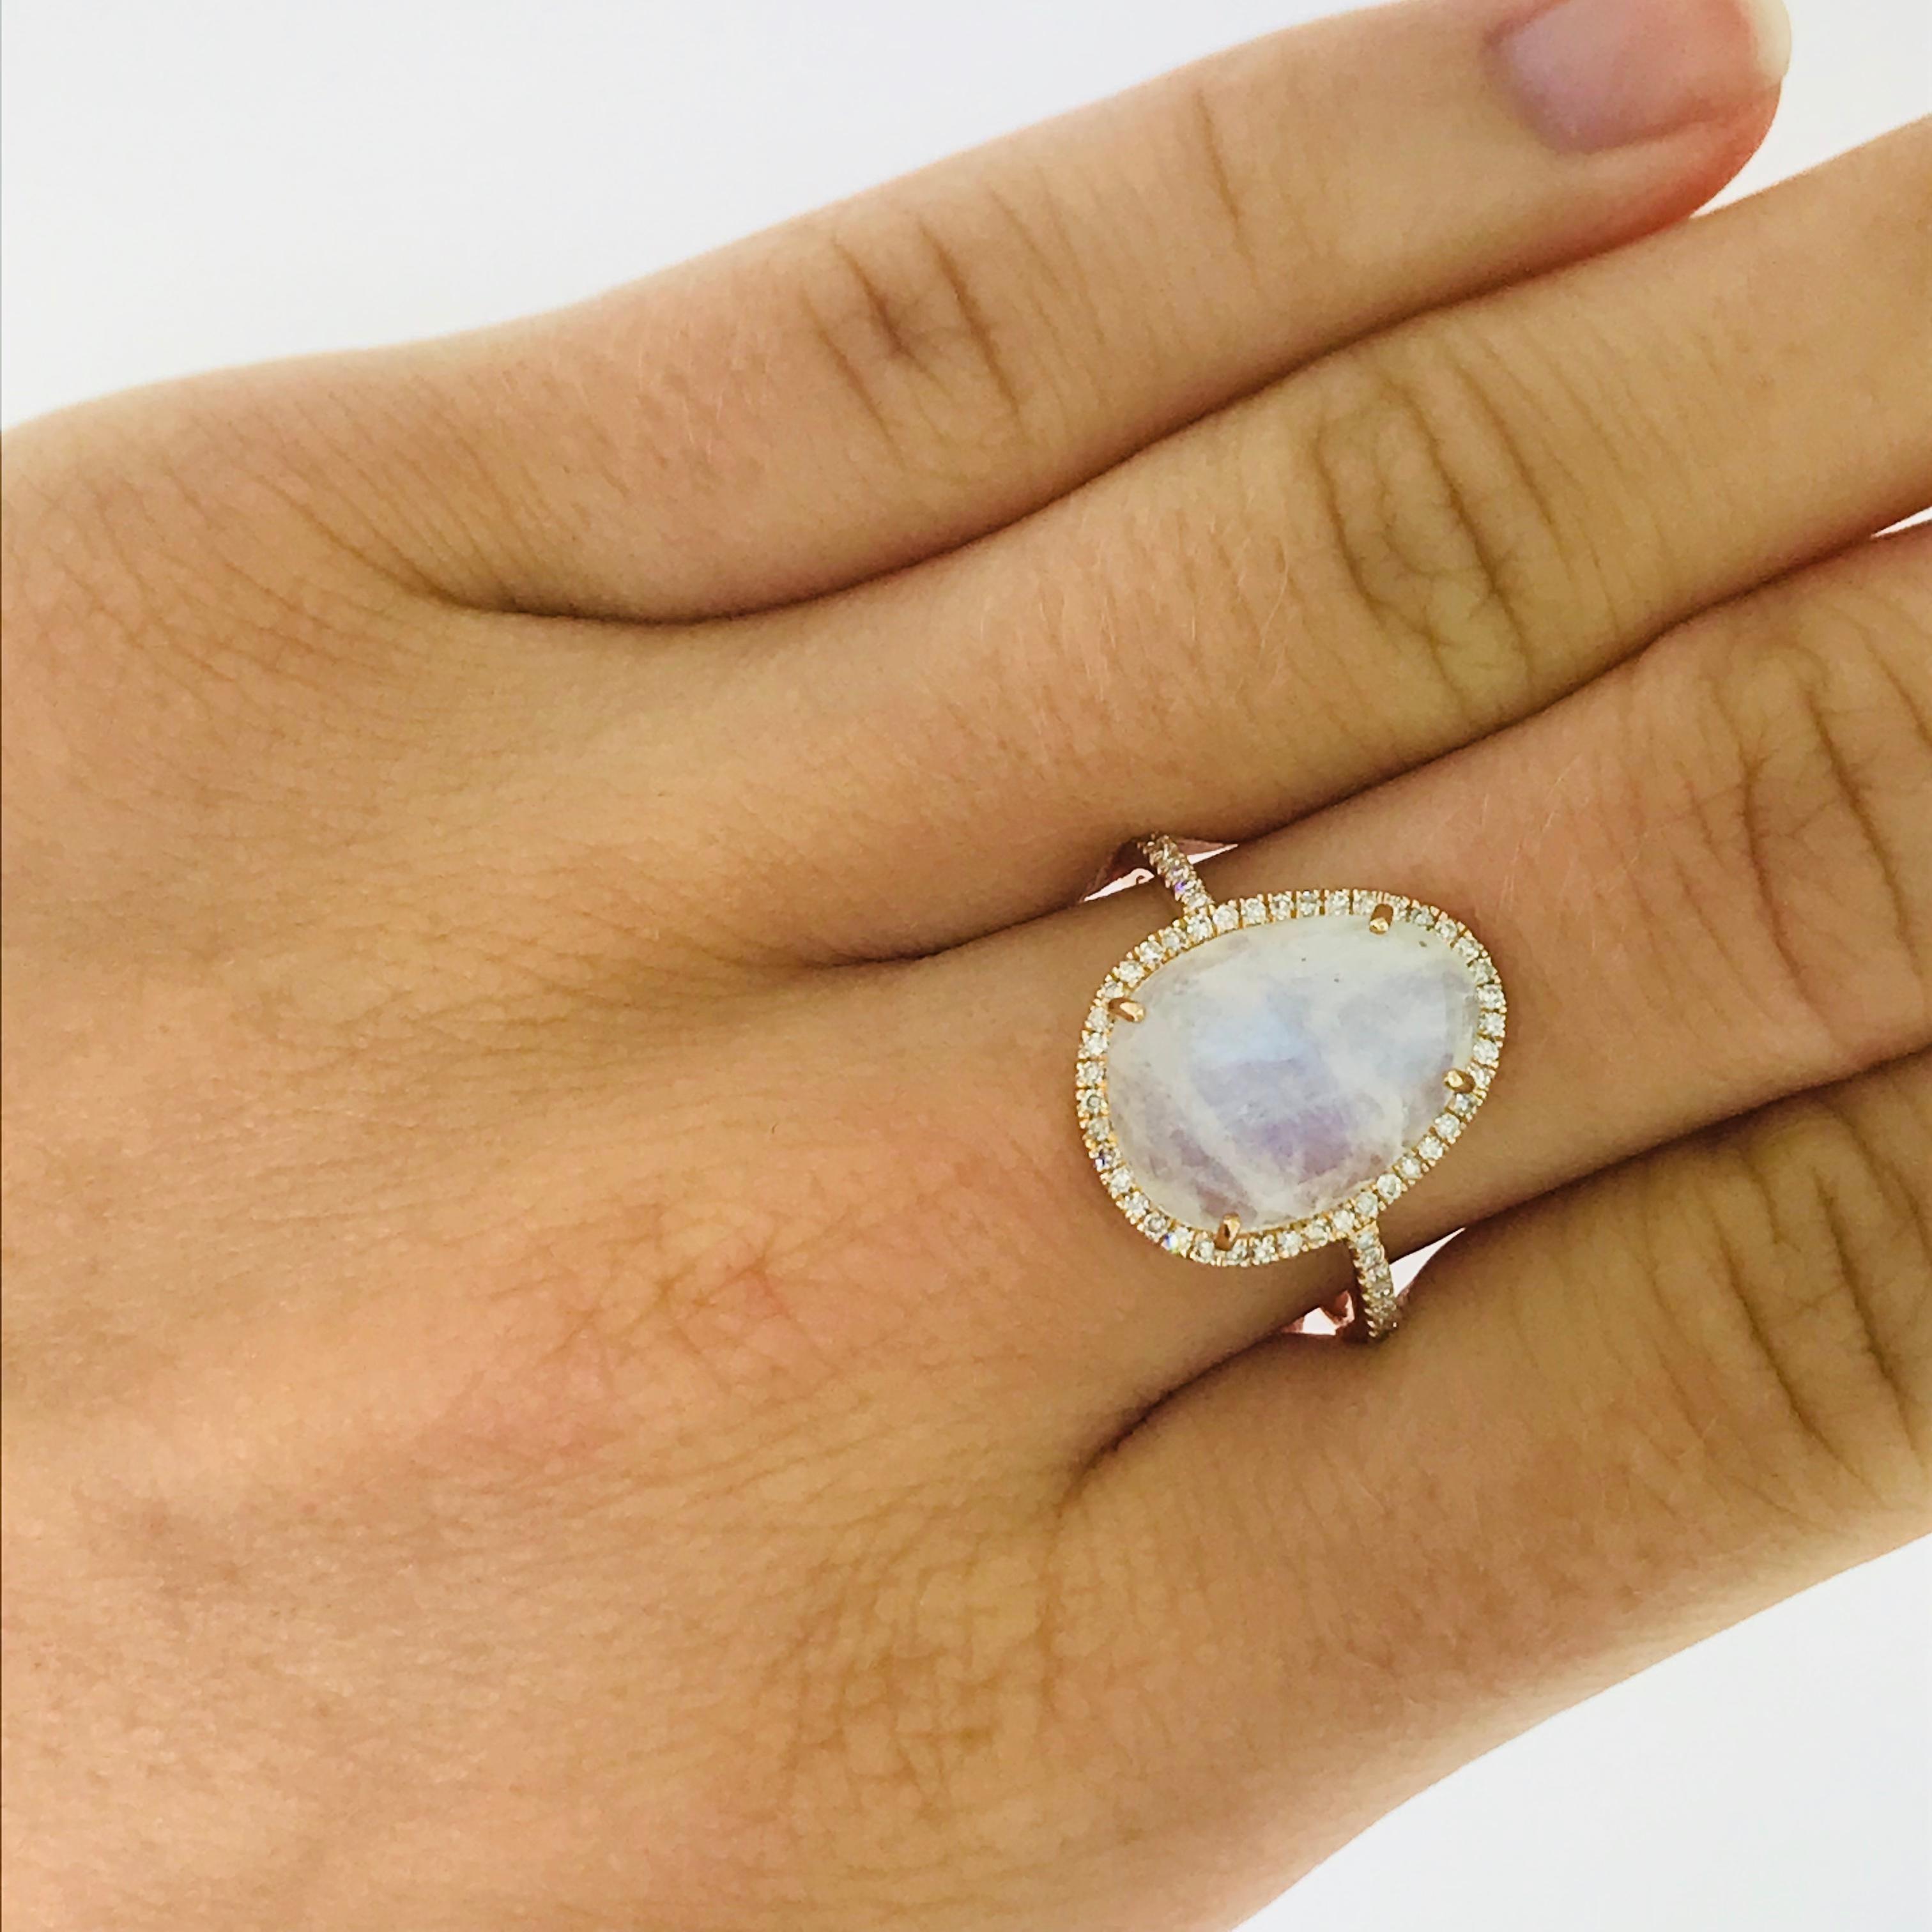 Genuine 4.75 carat  Rainbow Moonstone and Brilliant Diamond Ring with all the iridescence and sparkle!

This ring has a 4.73 carat Rainbow moonstone, cut and faceted in an organic shape, unique to this ring! The organic shape stays true to the